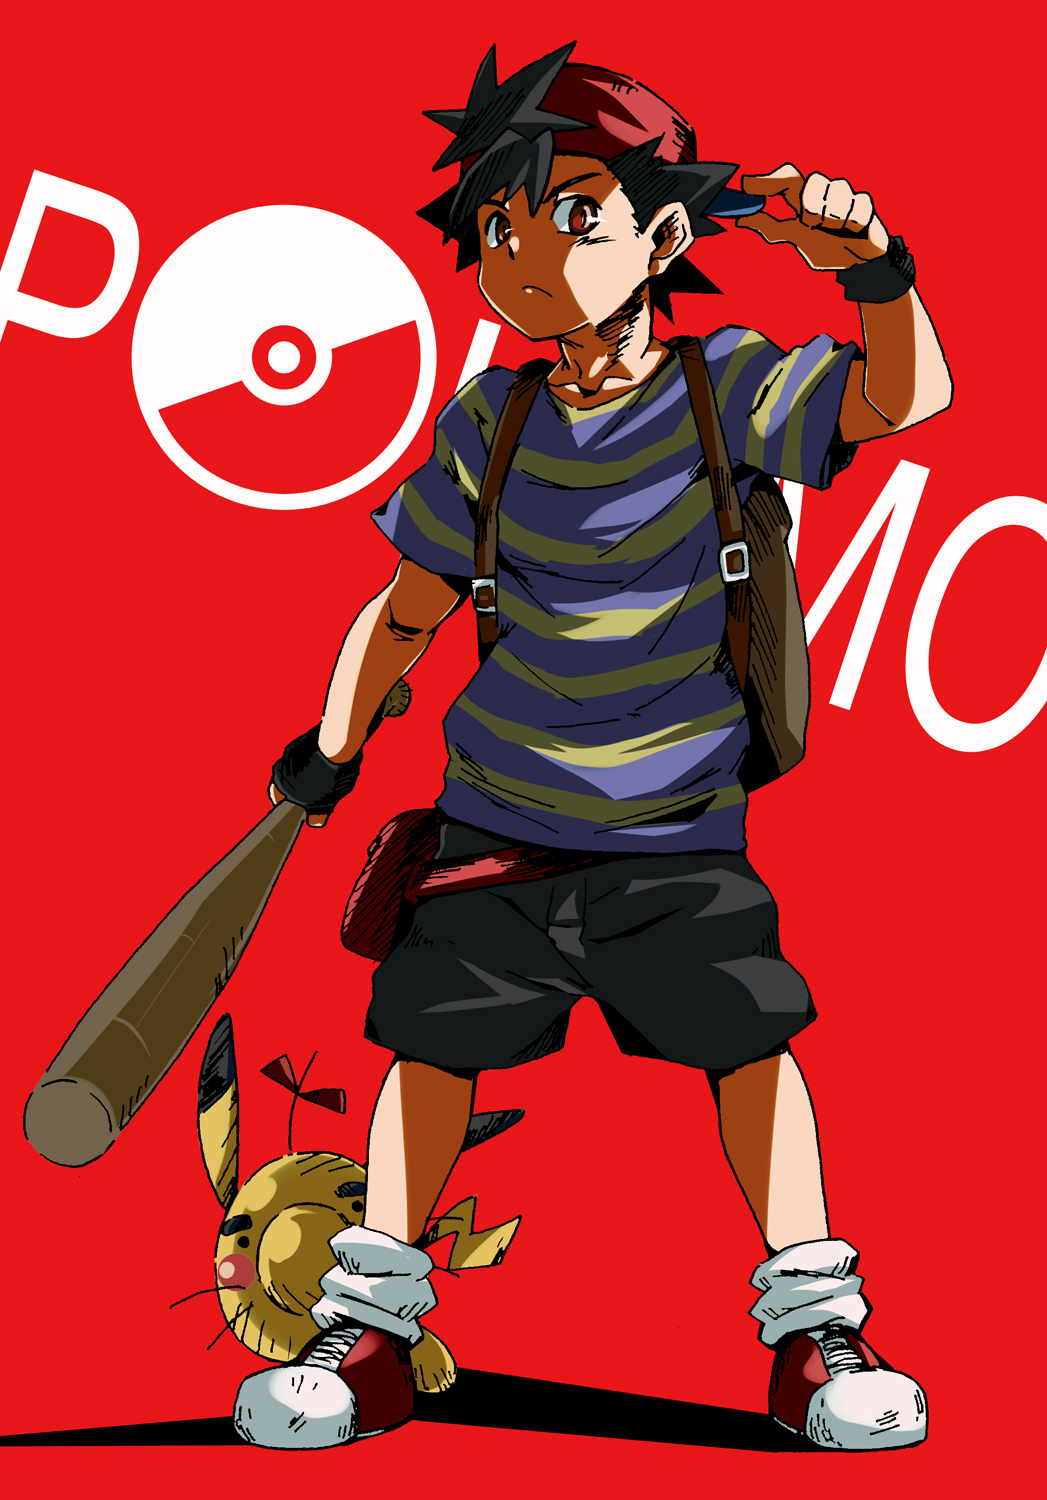 1boy ash_ketchum backpack backwards_hat bag baseball_bat cosplay creature doseisan frown hat highres holding holding_baseball_bat khunpol looking_at_viewer male_focus mother_(game) mother_2 ness_(mother_2) ness_(mother_2)_(cosplay) pikachu pikachu_(cosplay) pikachu_ears pikachu_tail poke_ball pokemon pokemon_(anime) pokemon_ears pokemon_tail red_background red_eyes red_footwear red_headwear shadow shirt shorts standing striped striped_shirt tail